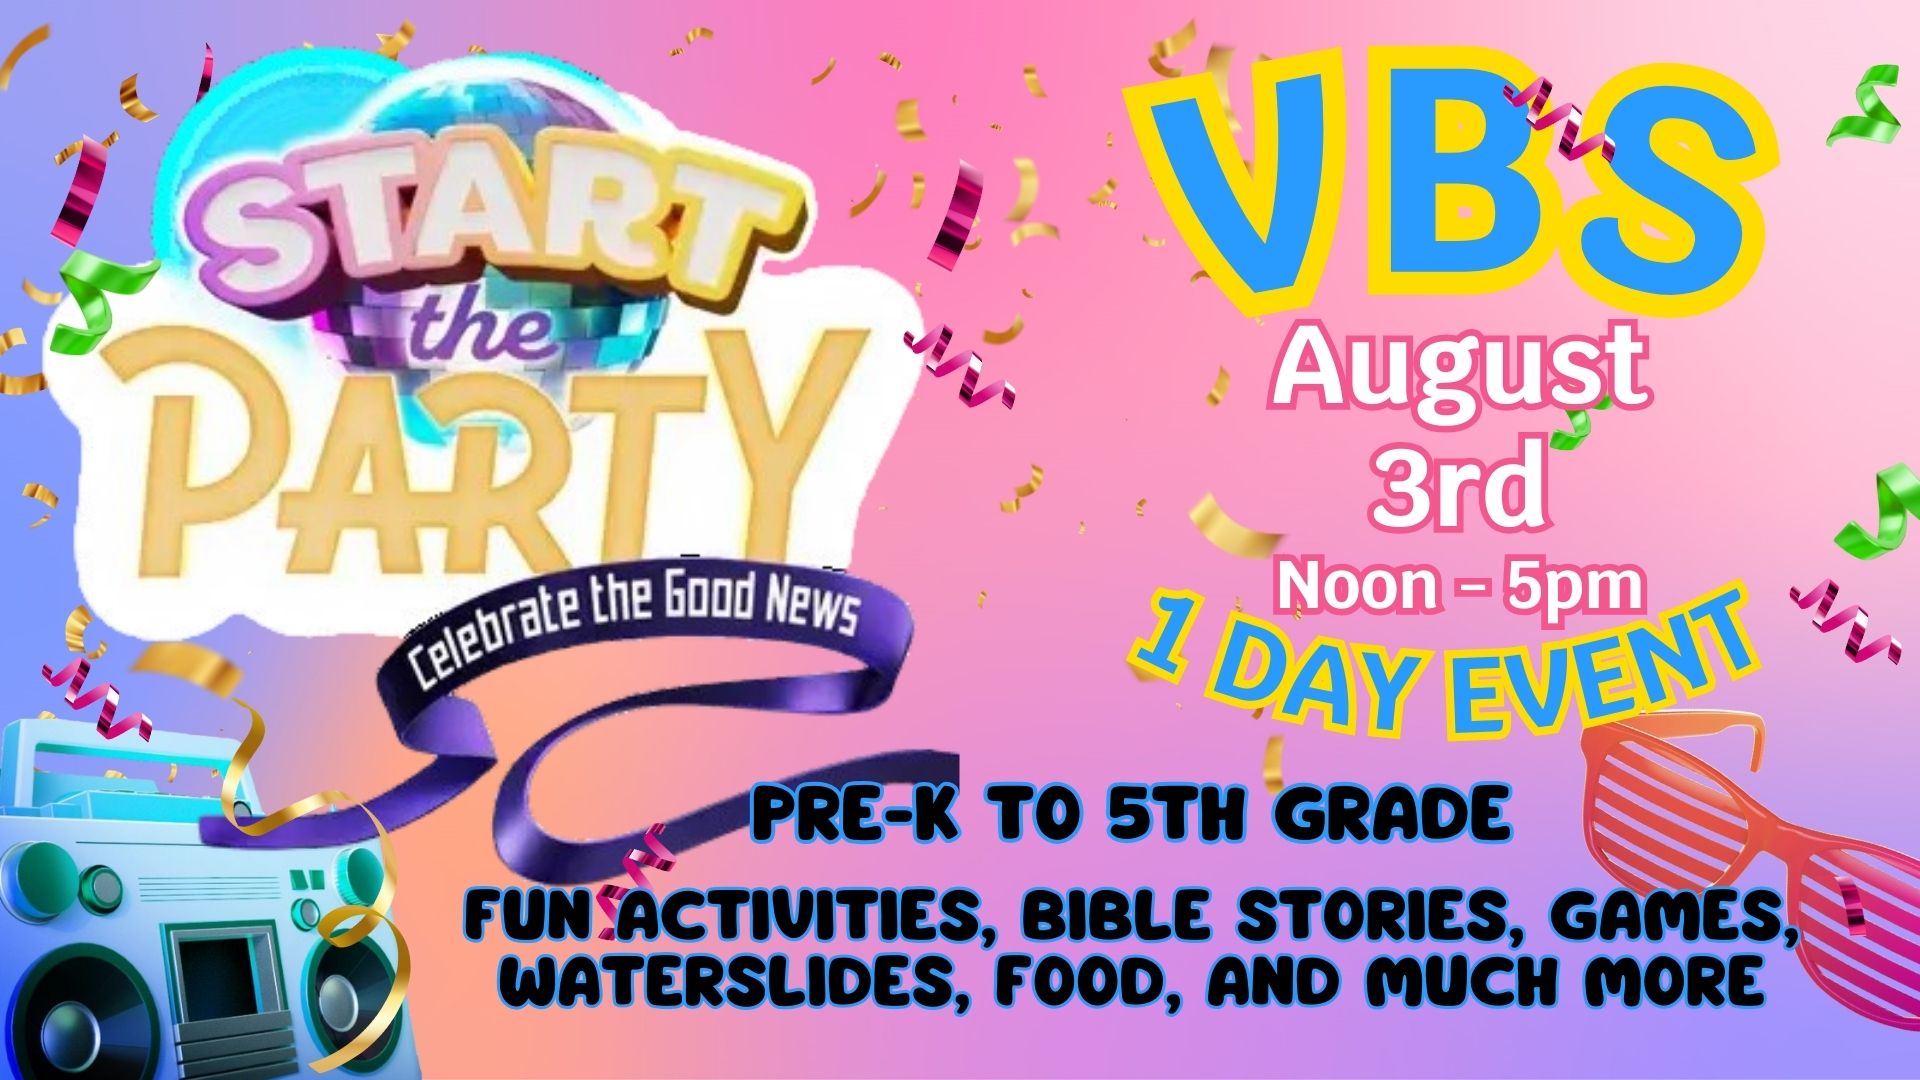 VBS ~ 1 Day Event August 3rd. Click image for more details